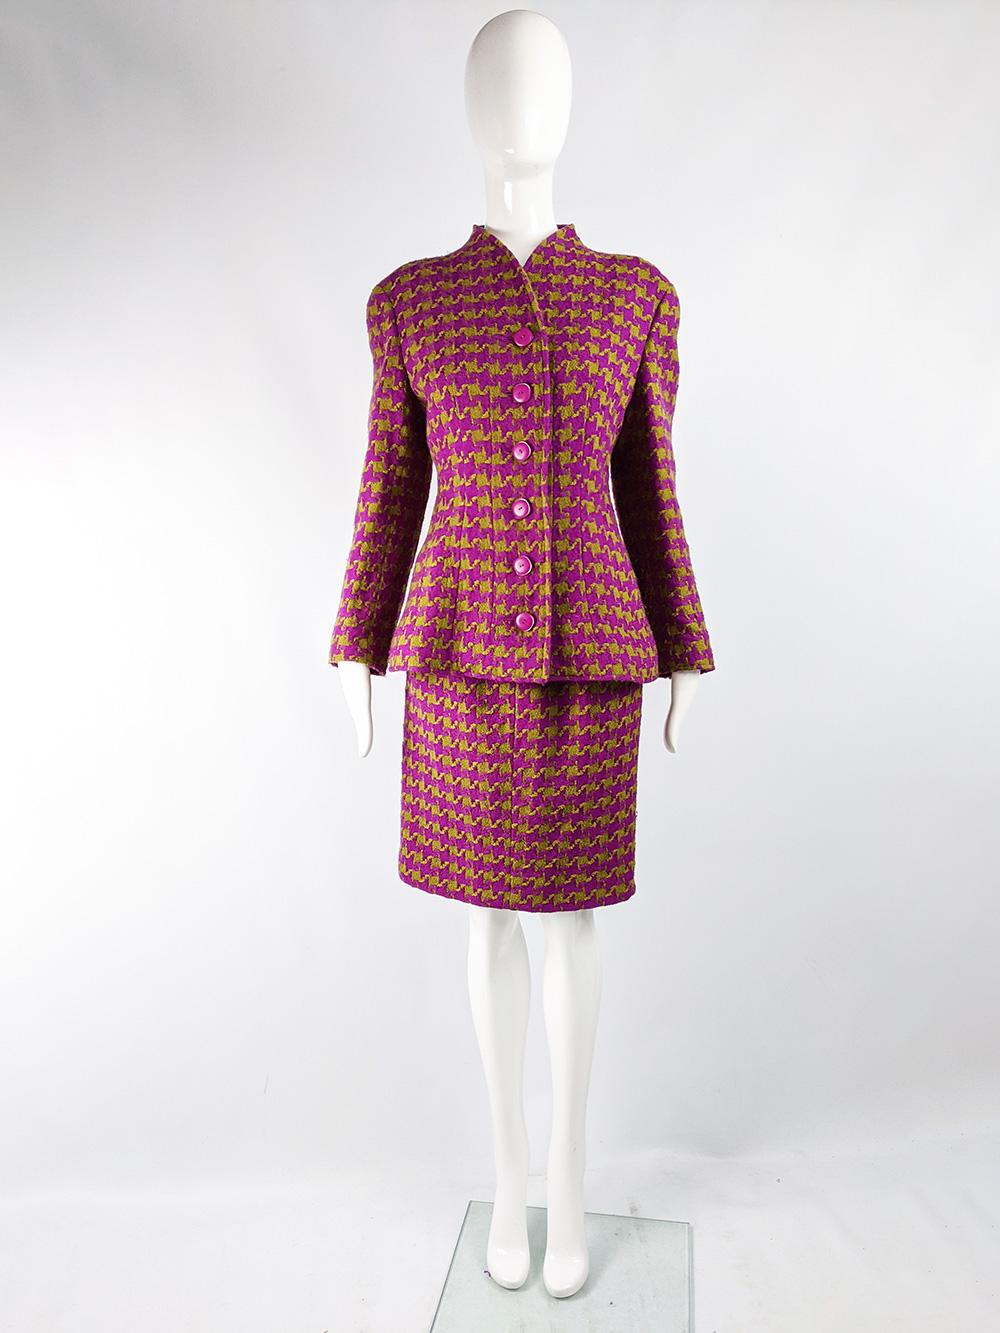 An incredibly chic vintage womens skirt suit from the 80s by Valentino. In a fuchsia and olive green houndstooth check tweed with shoulder pads that puff out the top of the sleeves without adding bulk and a jacket that flares out at the hips.